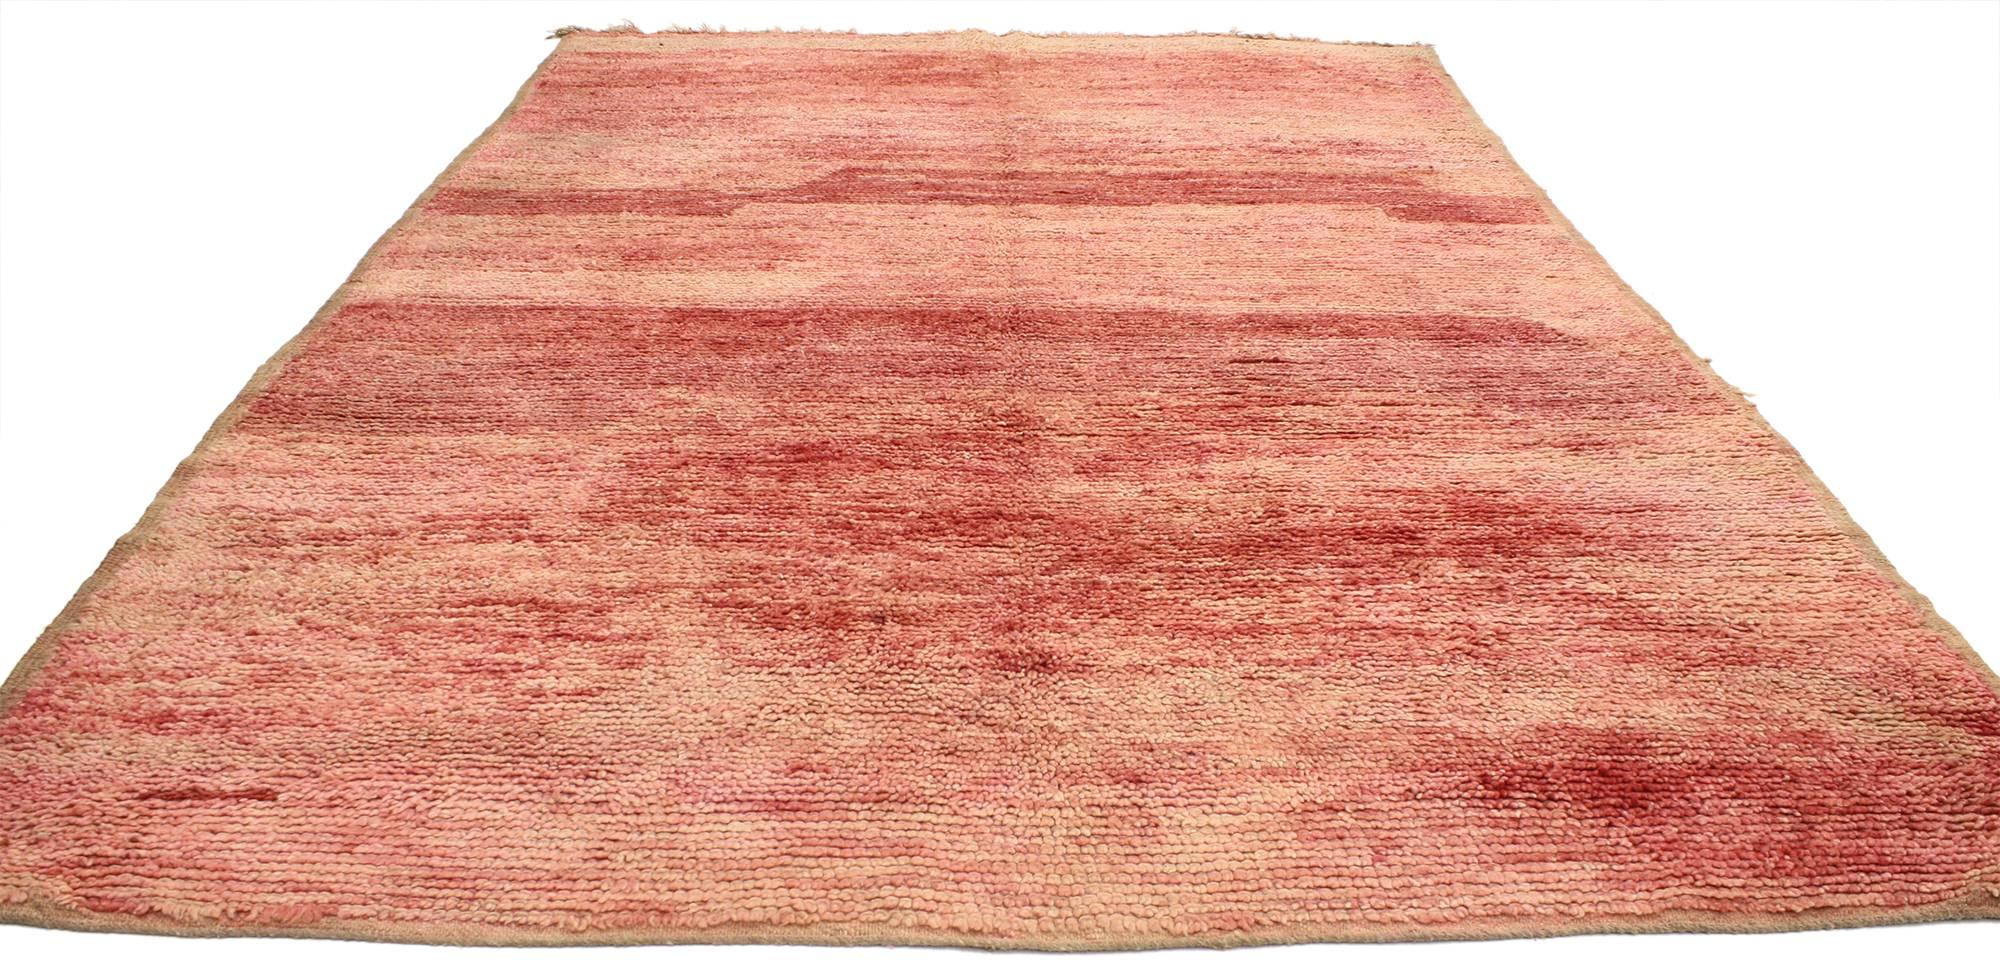 20593, vintage Berber Moroccan rug with sunset colors. A beautiful blend of fiery red and softer tones come together to create imagery of a warm, breezy Moroccan sunset. The blend of the colors are erratic yet harmonious on this vintage Berber